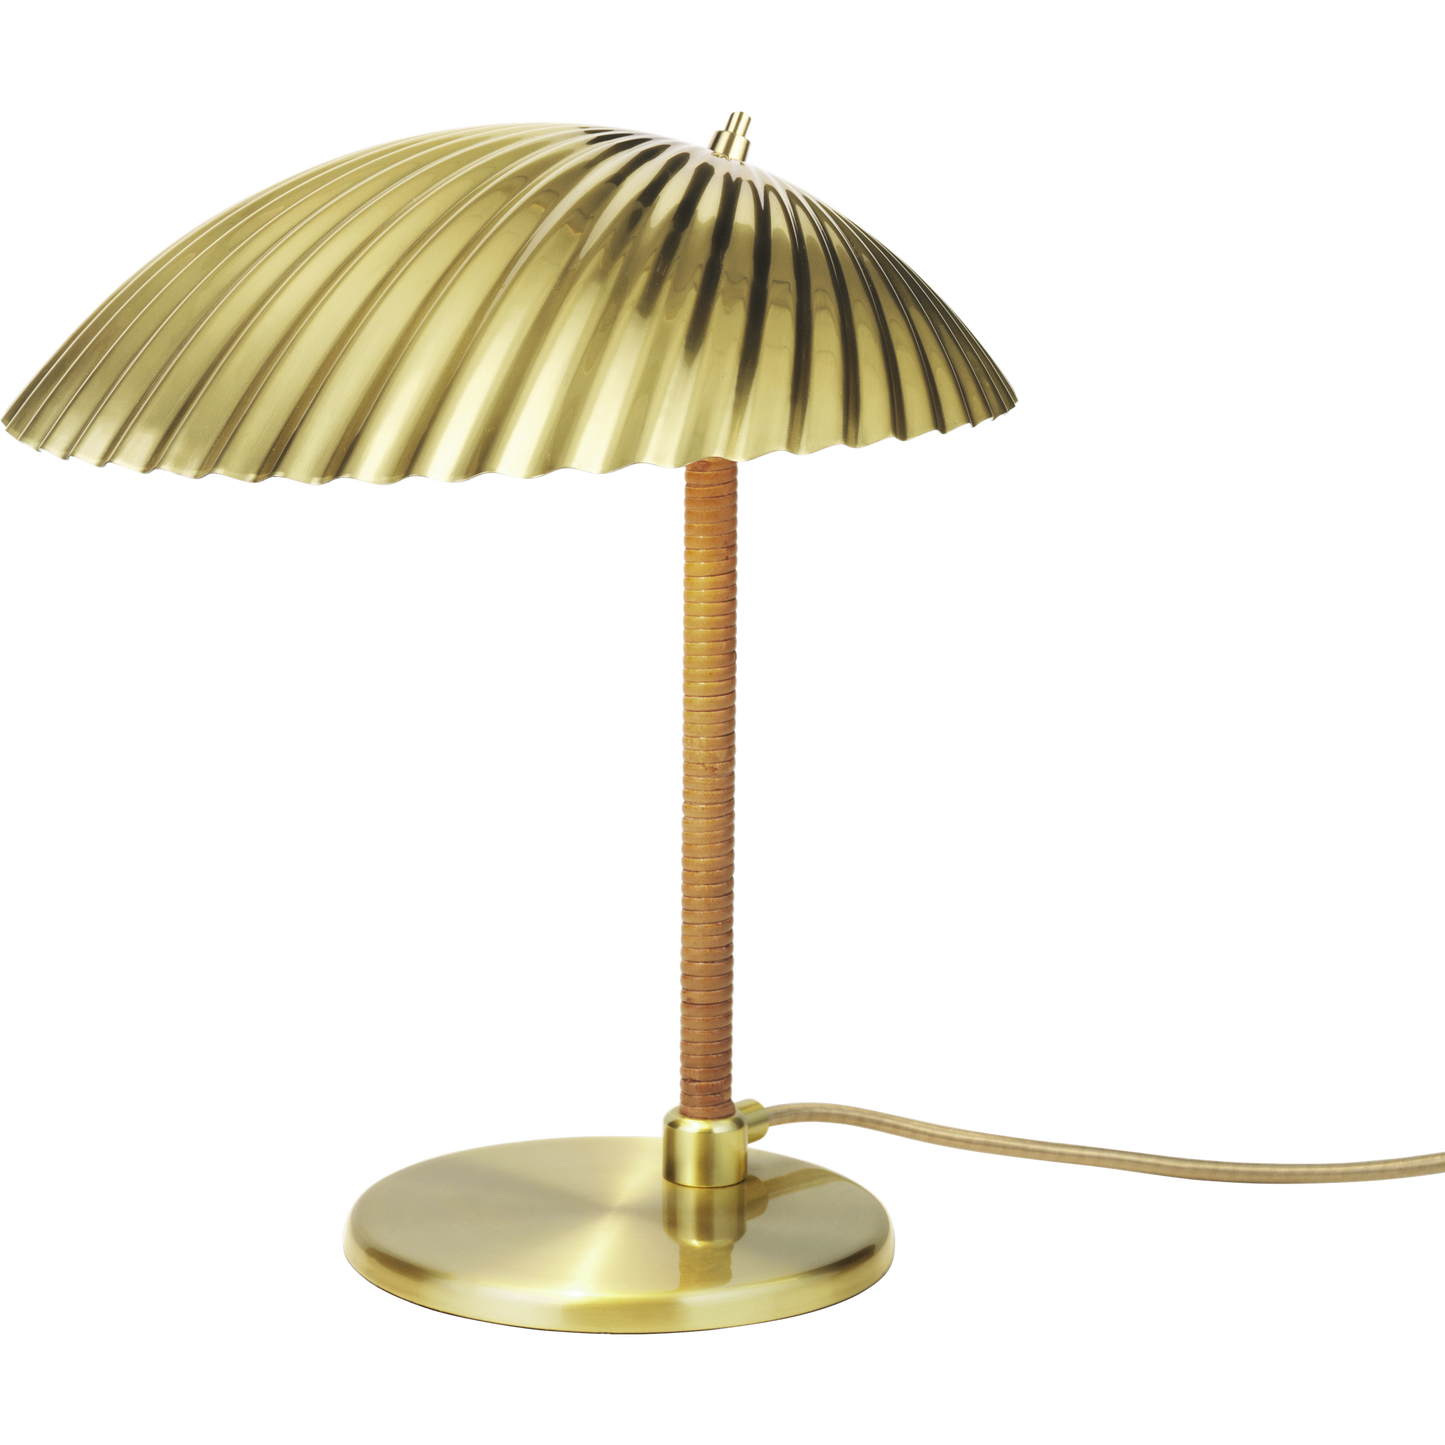 Tynell Collection 5321 Table Lamp by GUBI #Brass